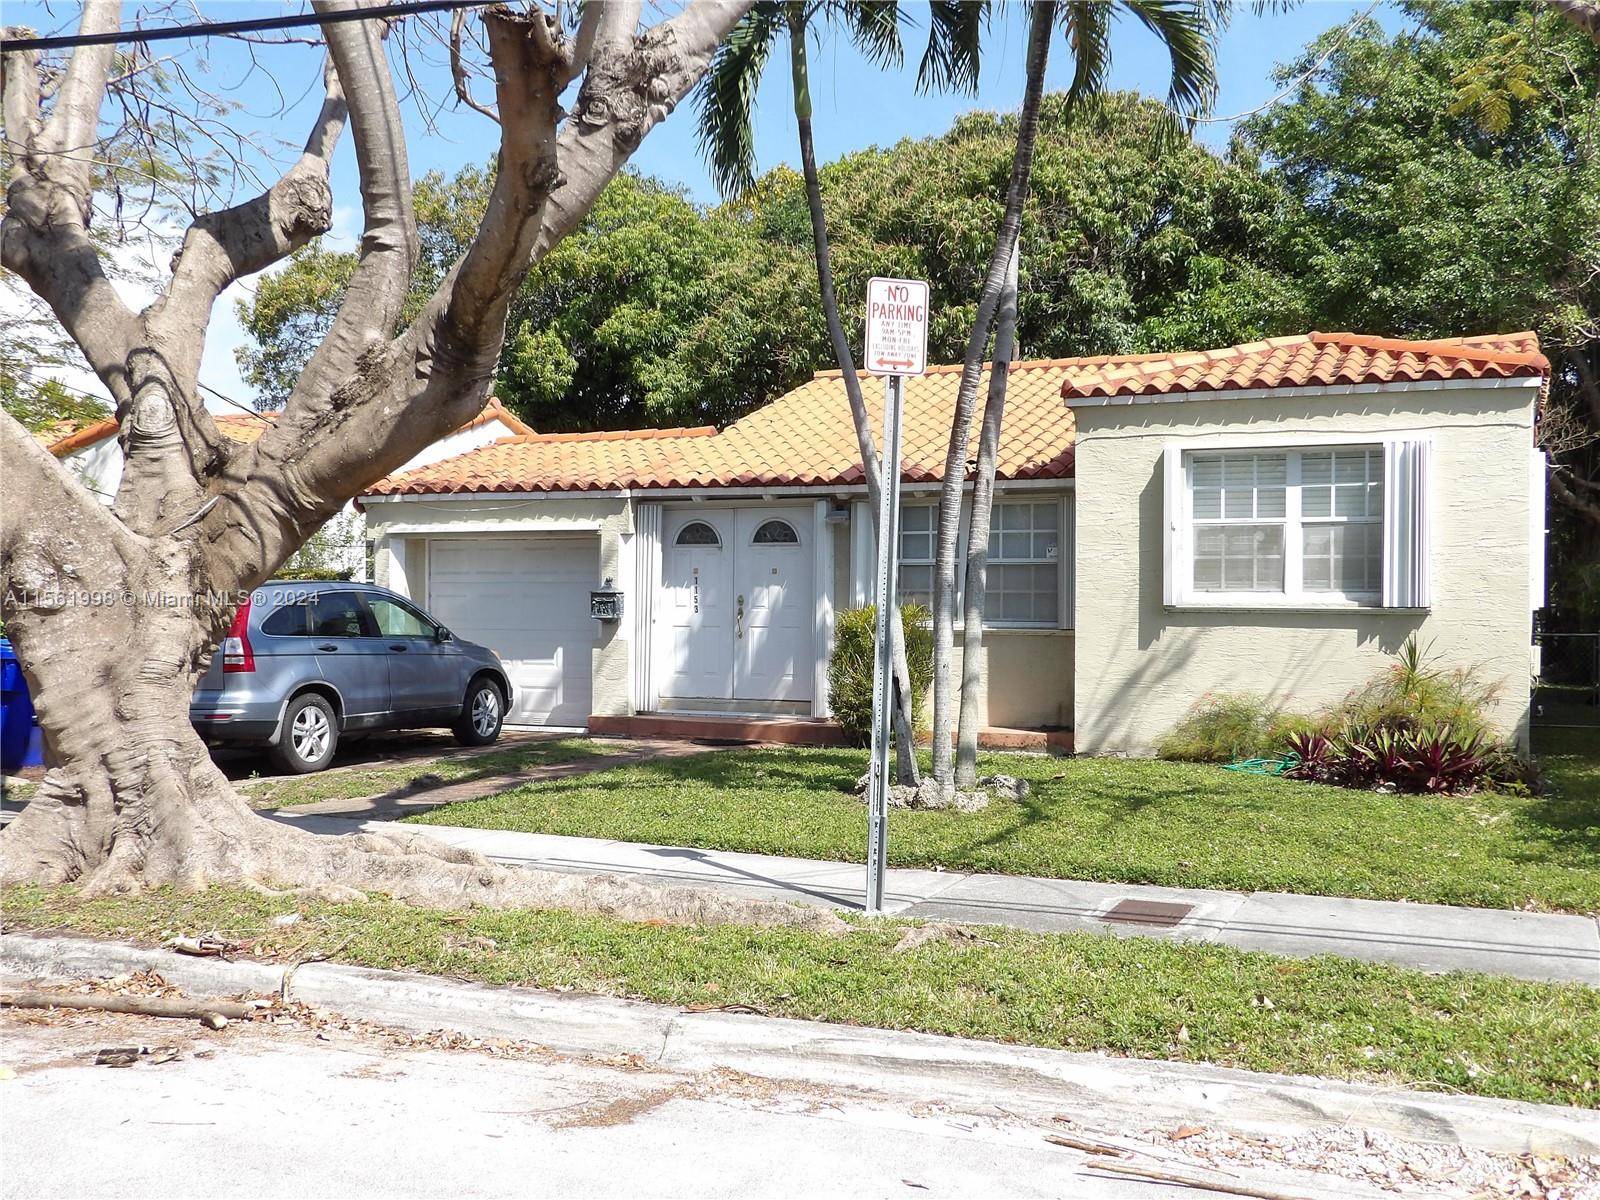 SINGLE FAMILY HOME WITH 2 BEDROOMS 2 BATHS 1 CAR GARAGE, TILED FLOORS, ZONED DUPLEX.